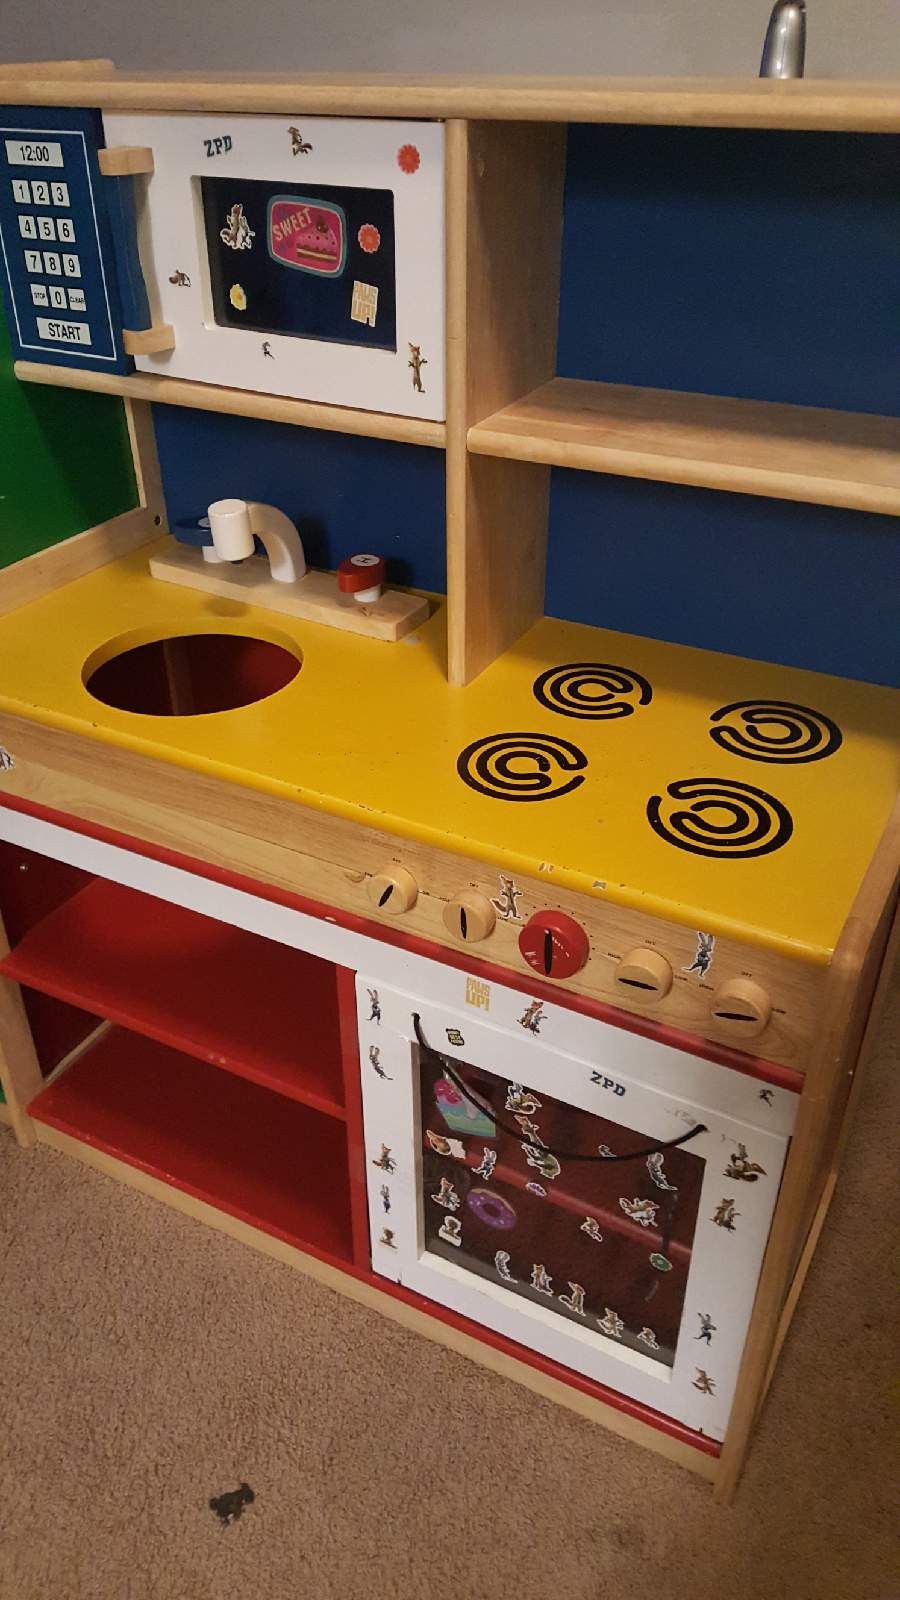 Wooden kitchen play $9 OBO